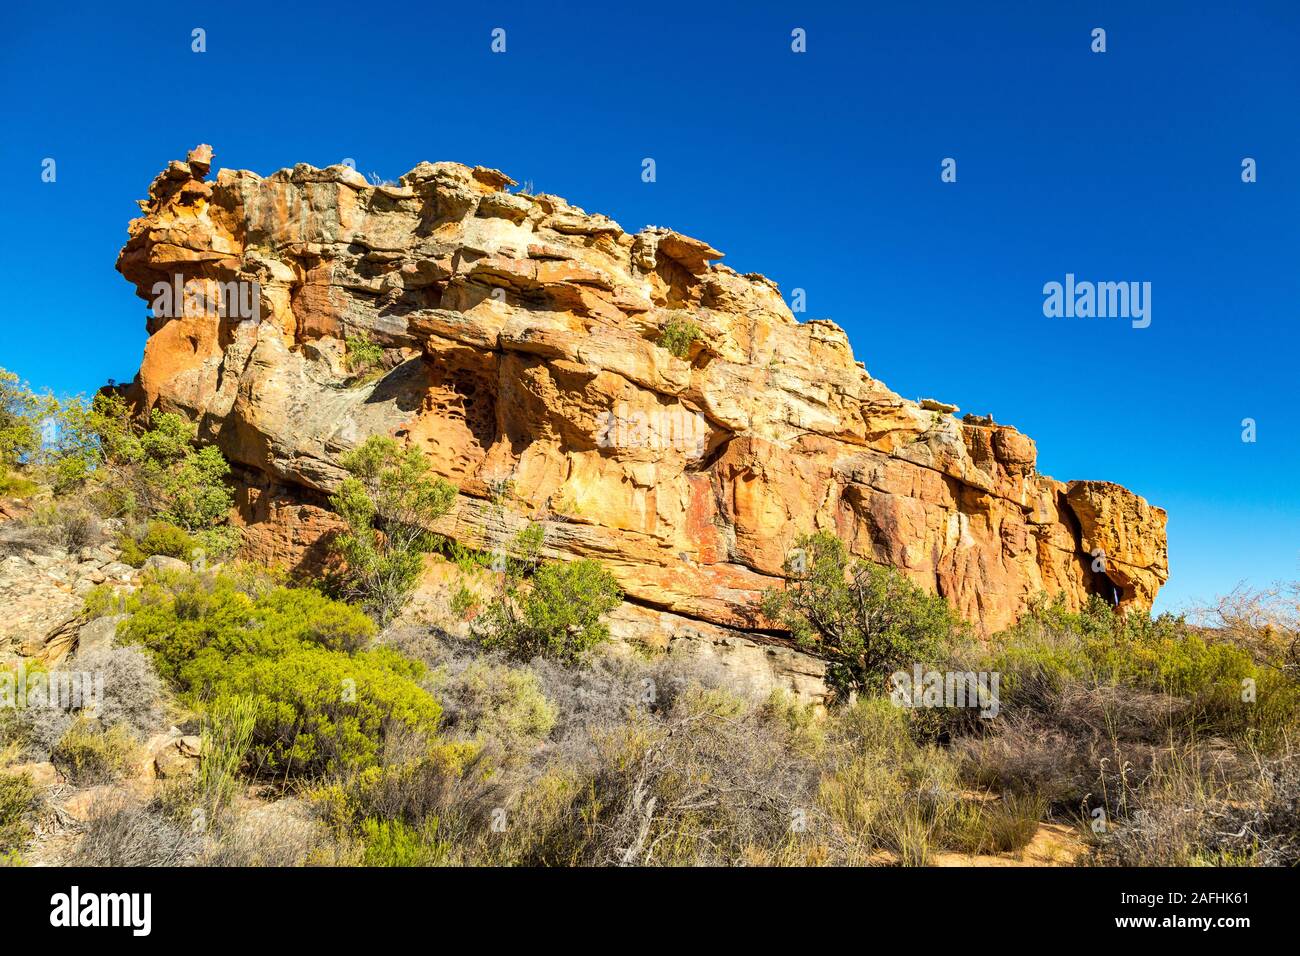 Sandstone rock formation of Cederberg Wilderness Area, Stadsaal, South Africa Stock Photo